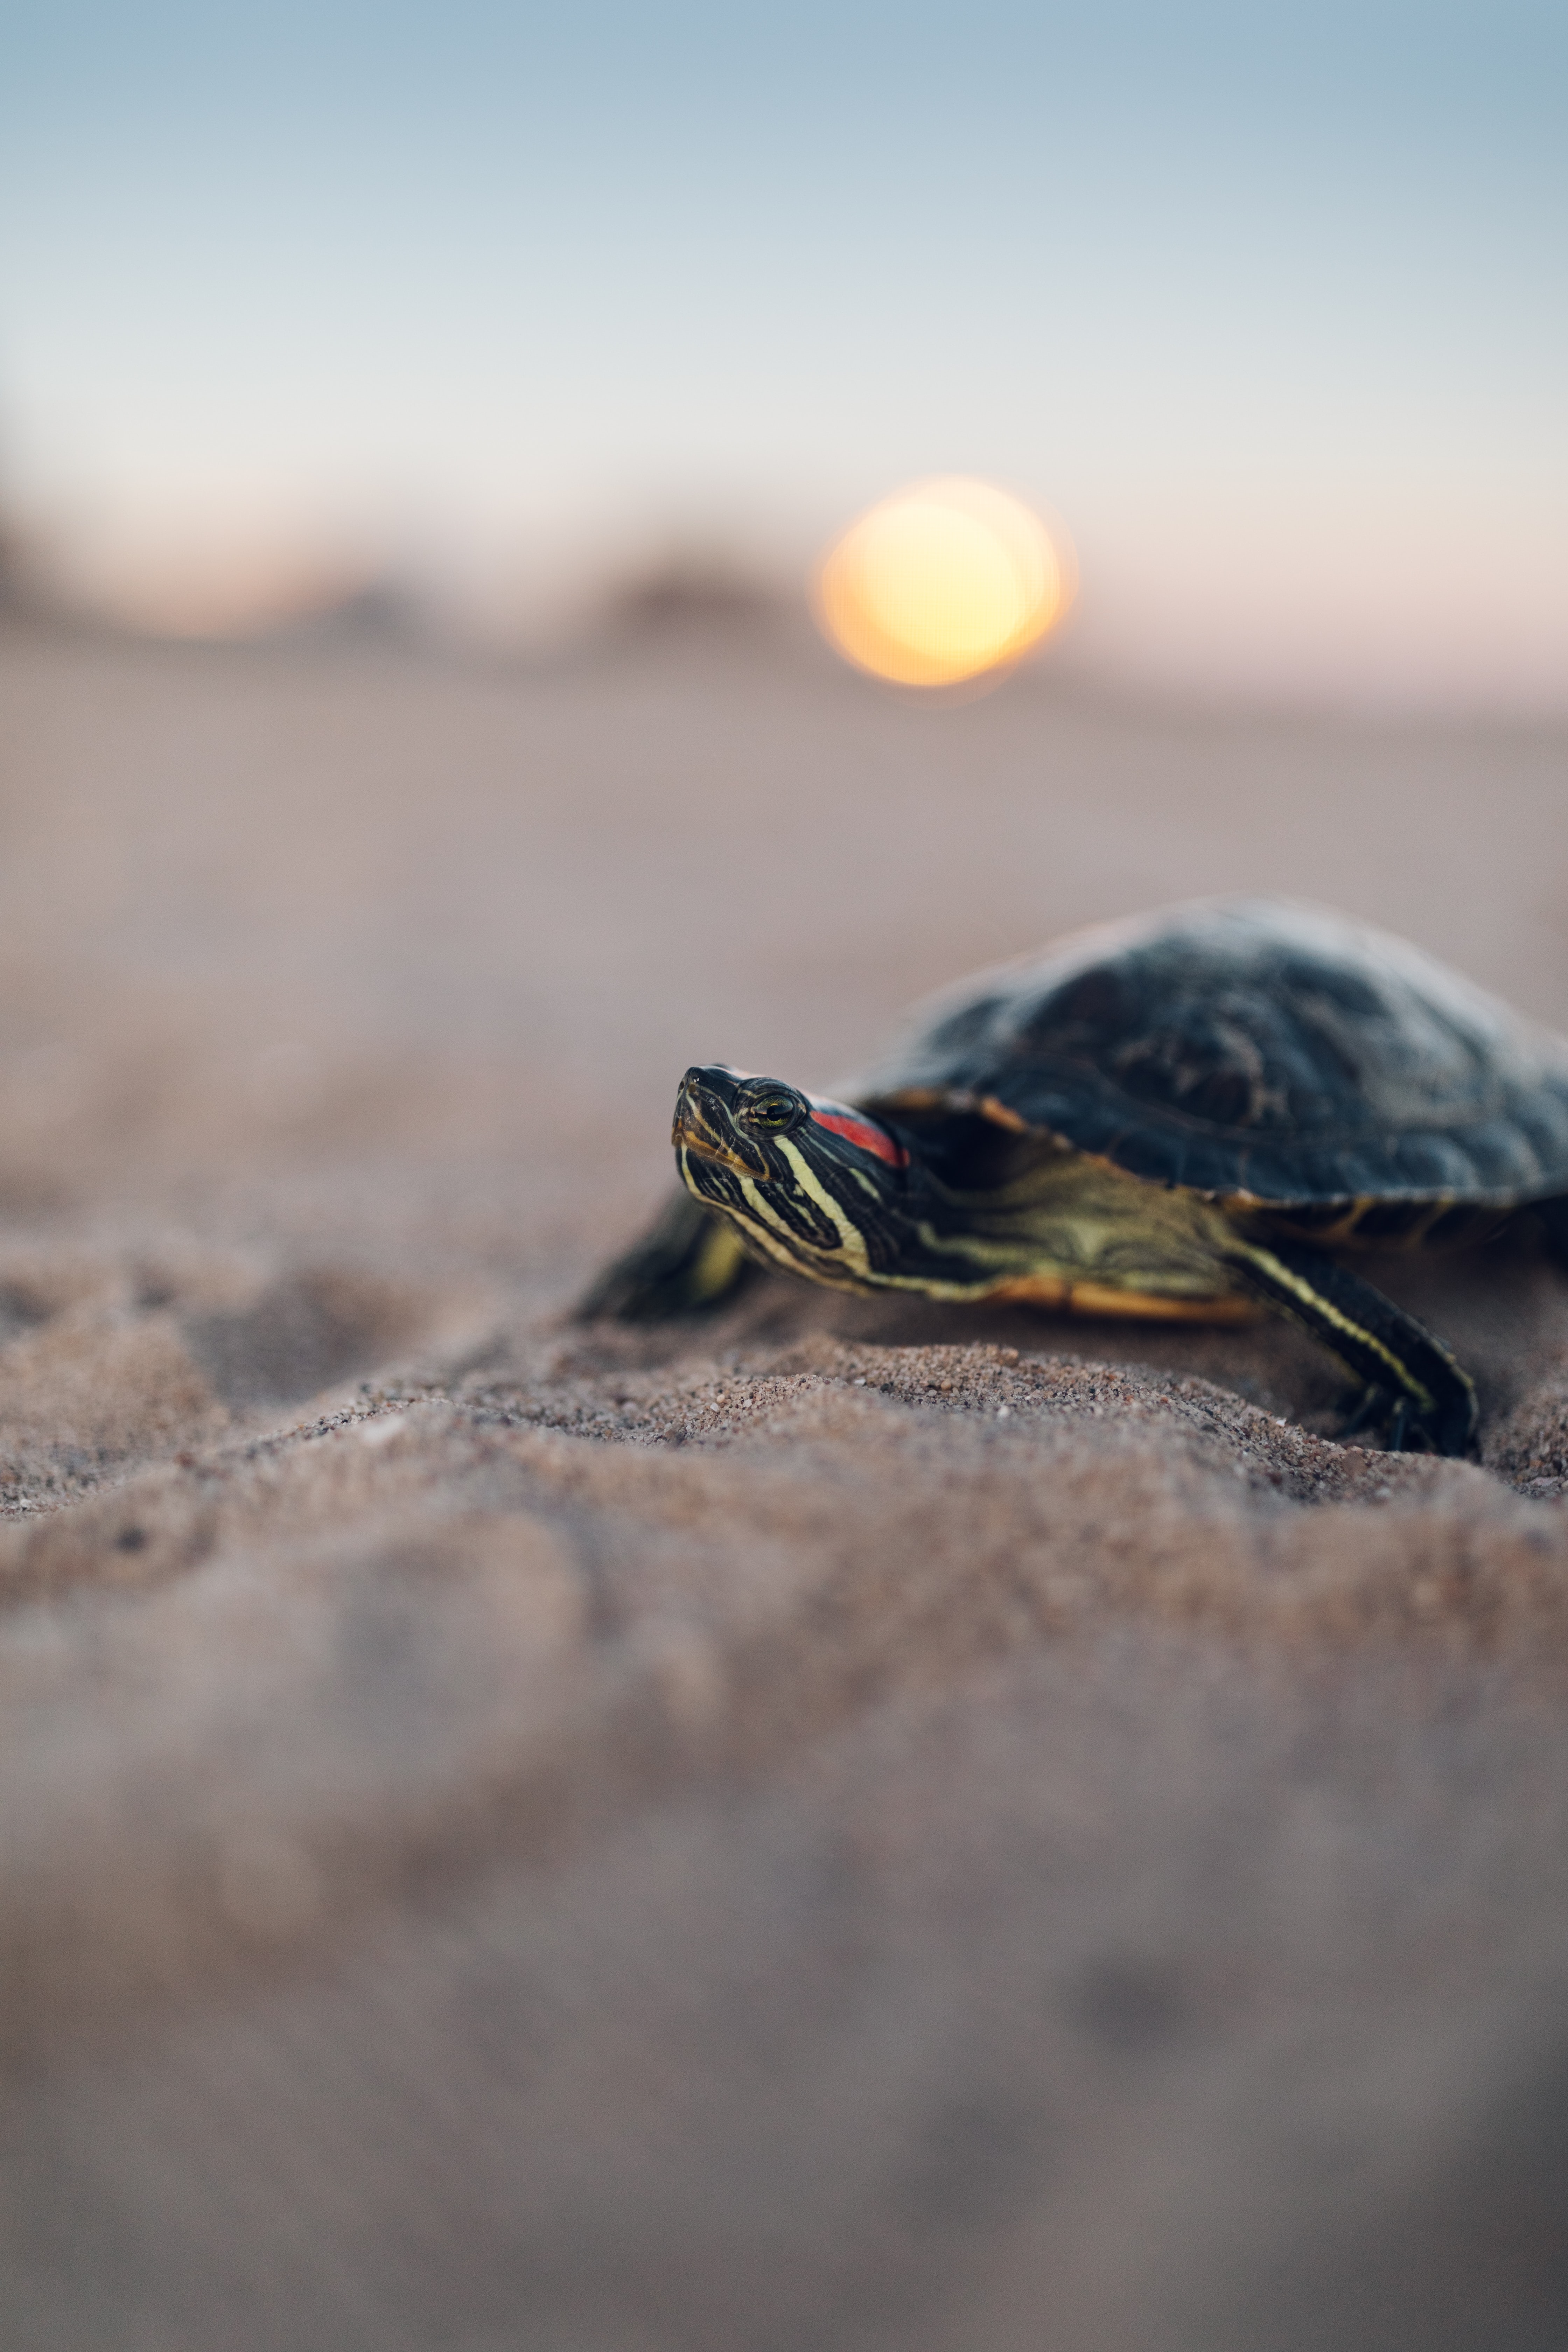 78286 download wallpaper animals, sand, blur, smooth, carapace, shell, turtle screensavers and pictures for free